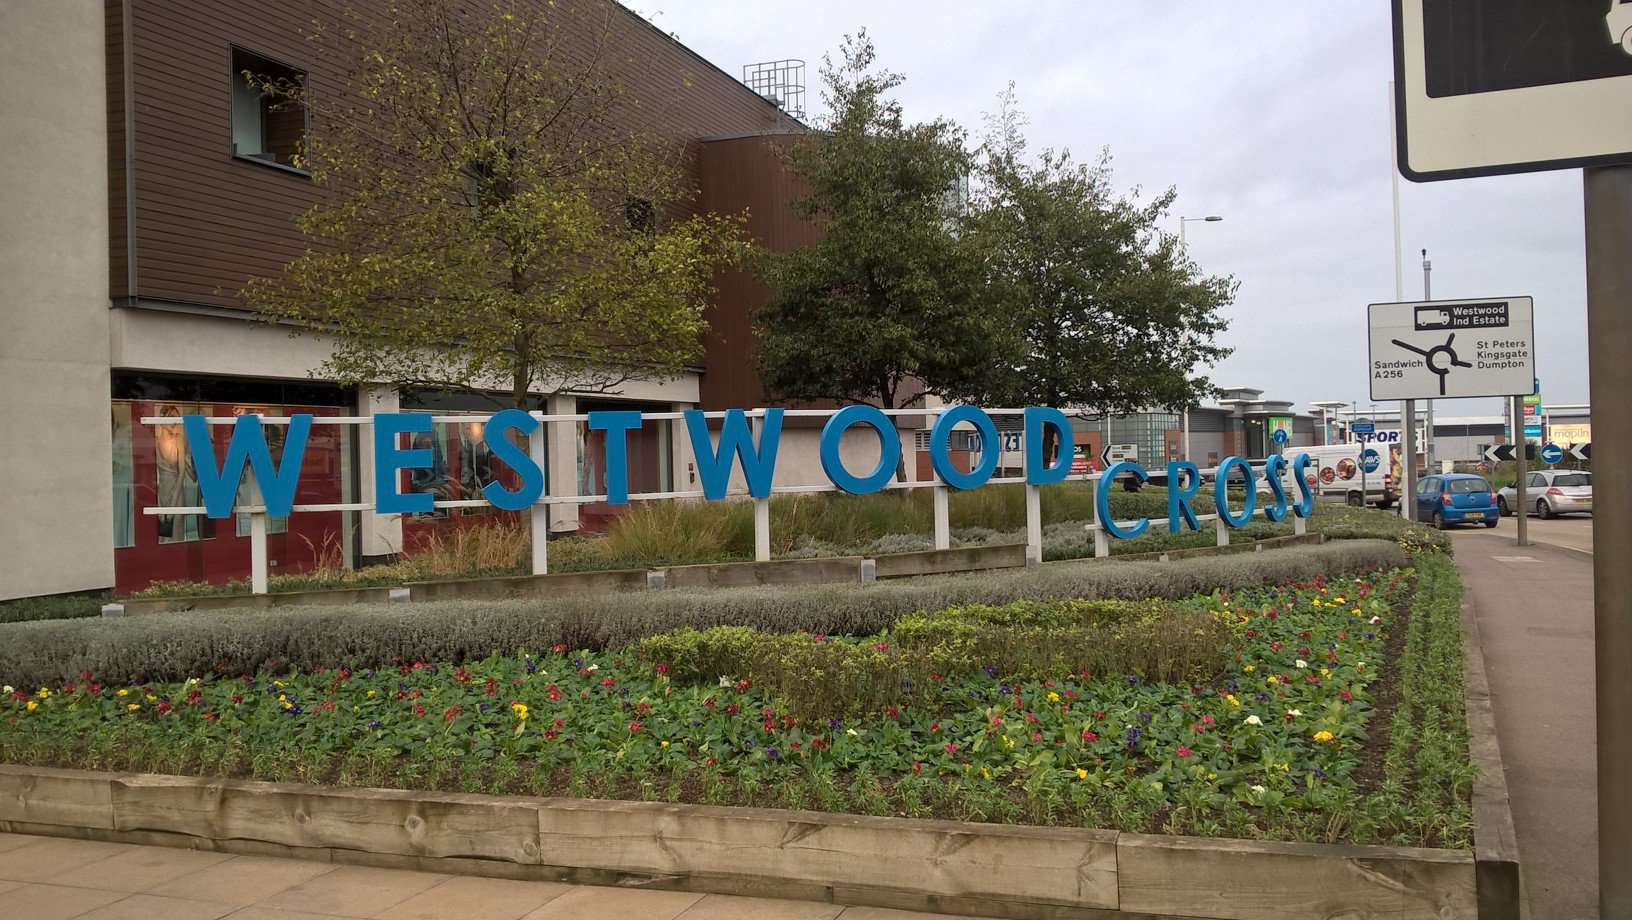 New contract win with Westwood Cross shopping centre